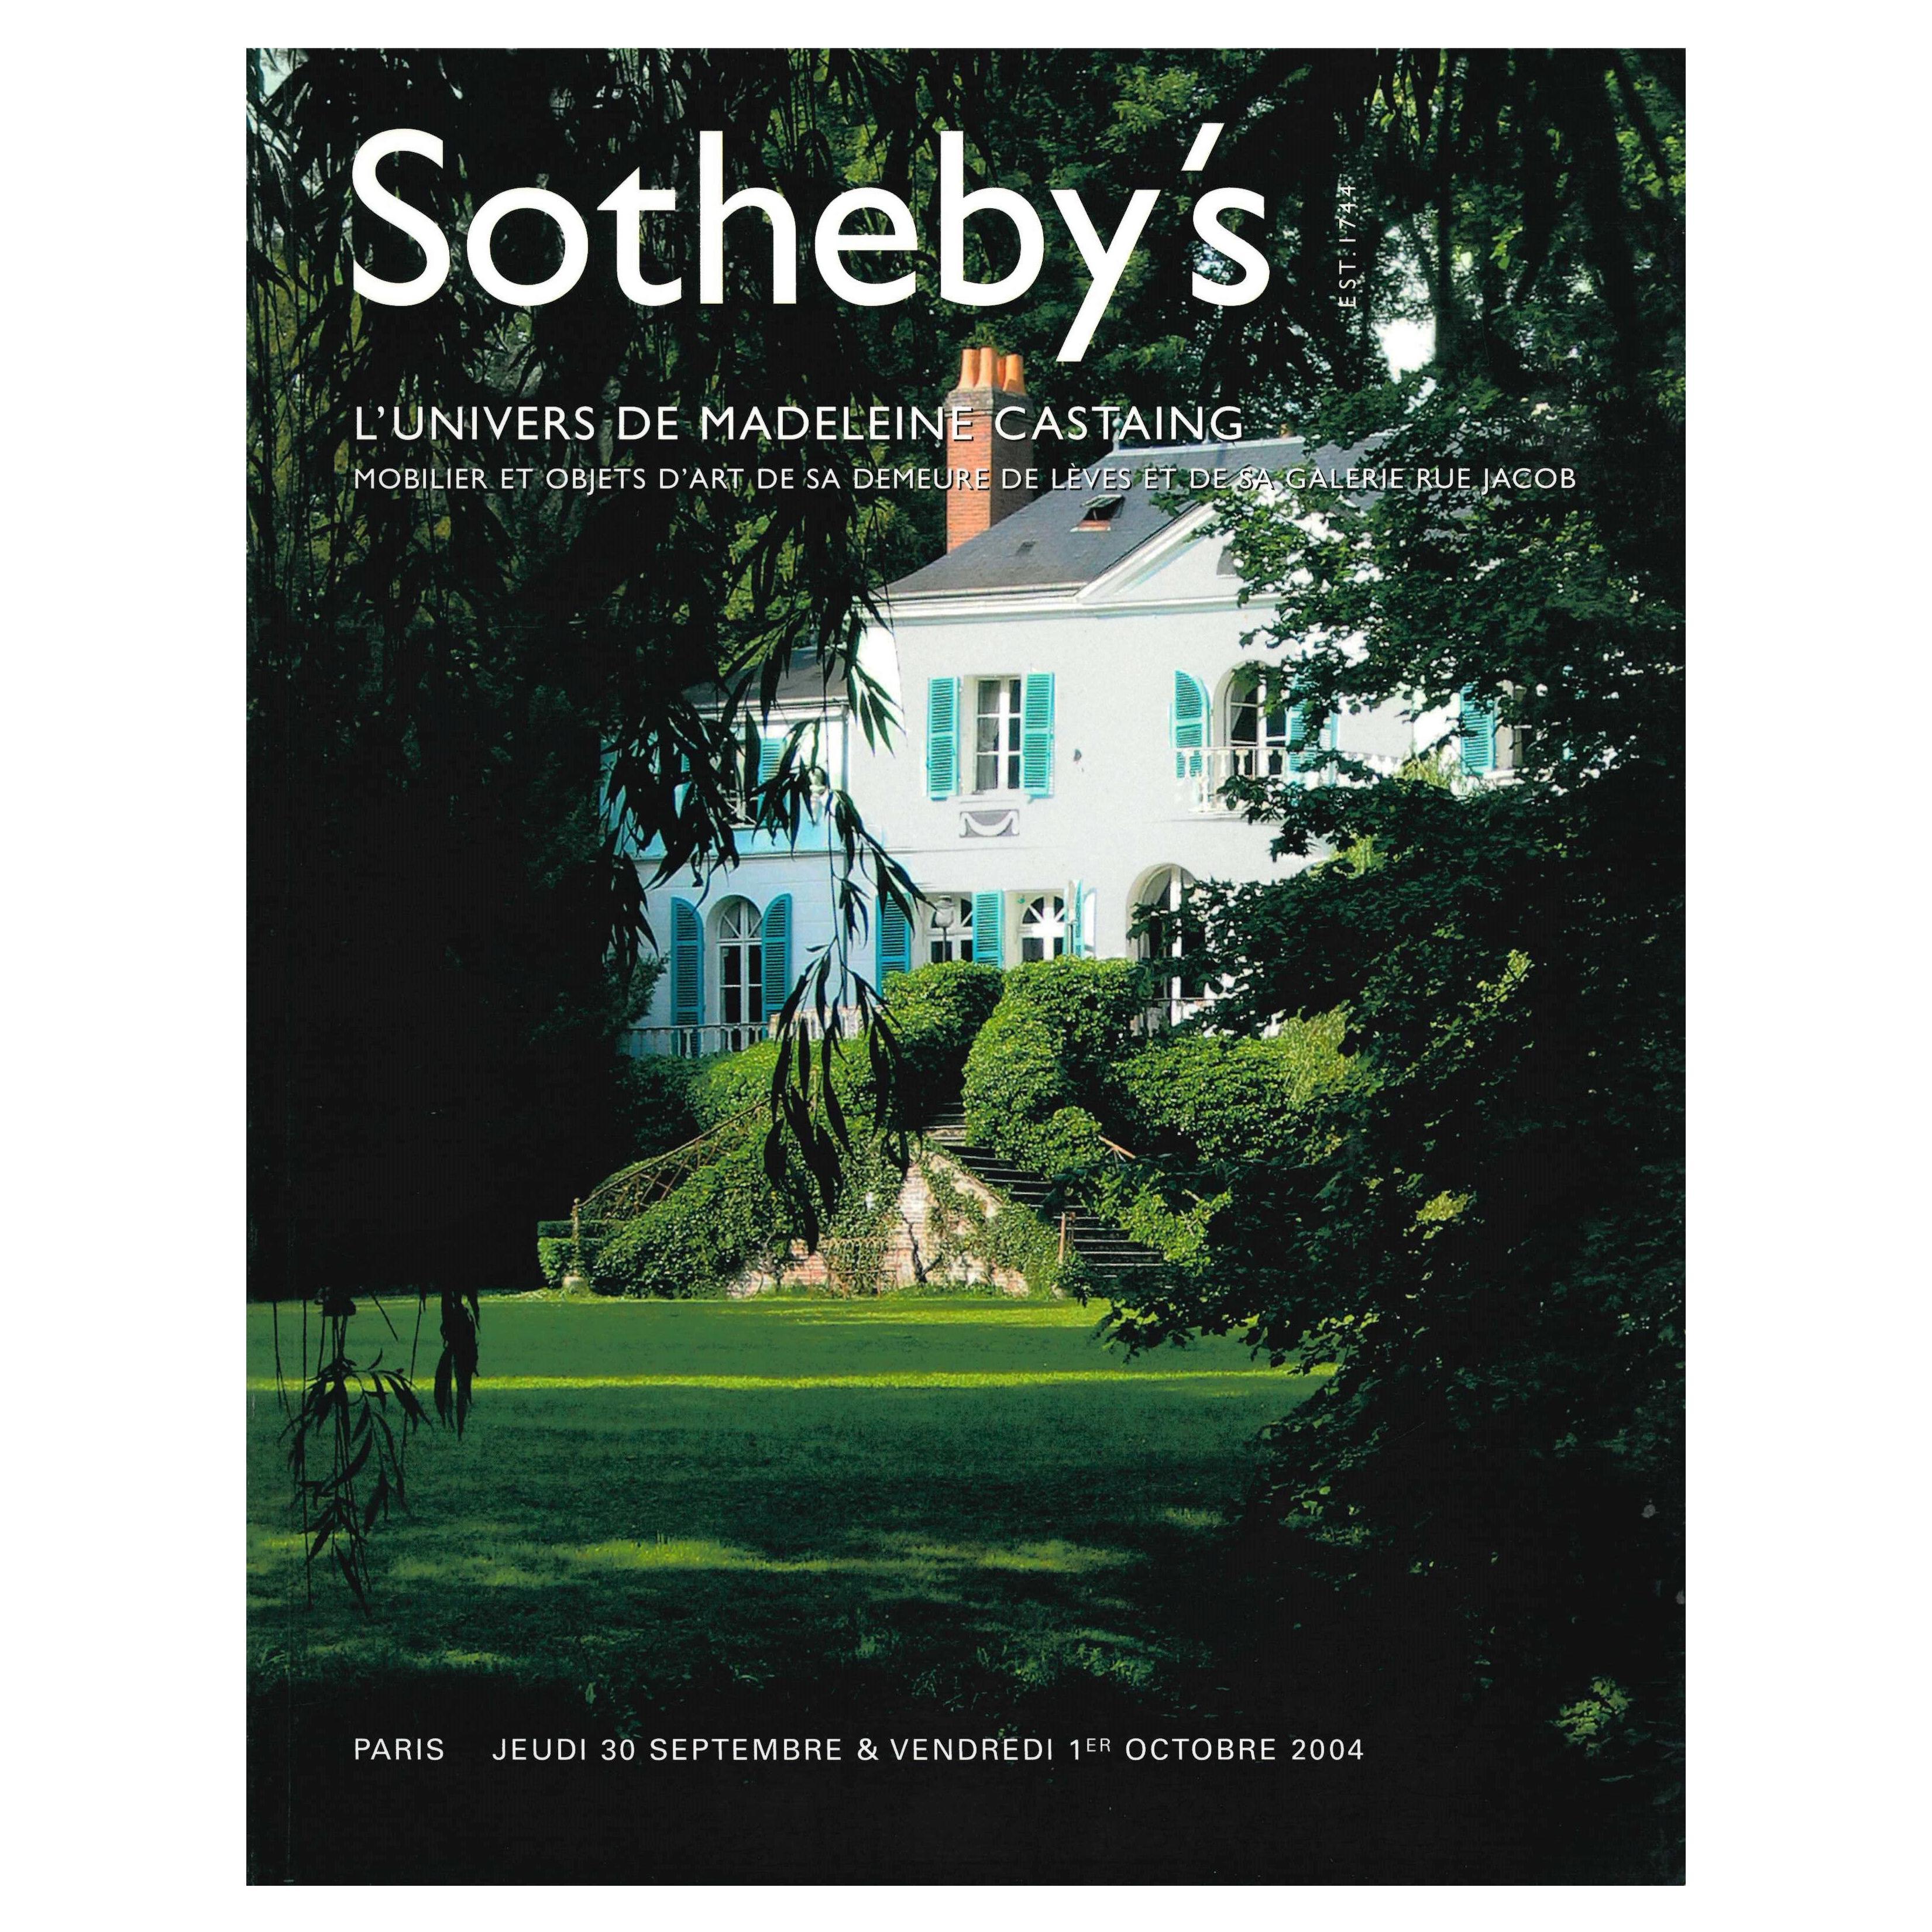 L'Univers de Madeleine Castaing, Sotheby's Sale Catalogue from 2004